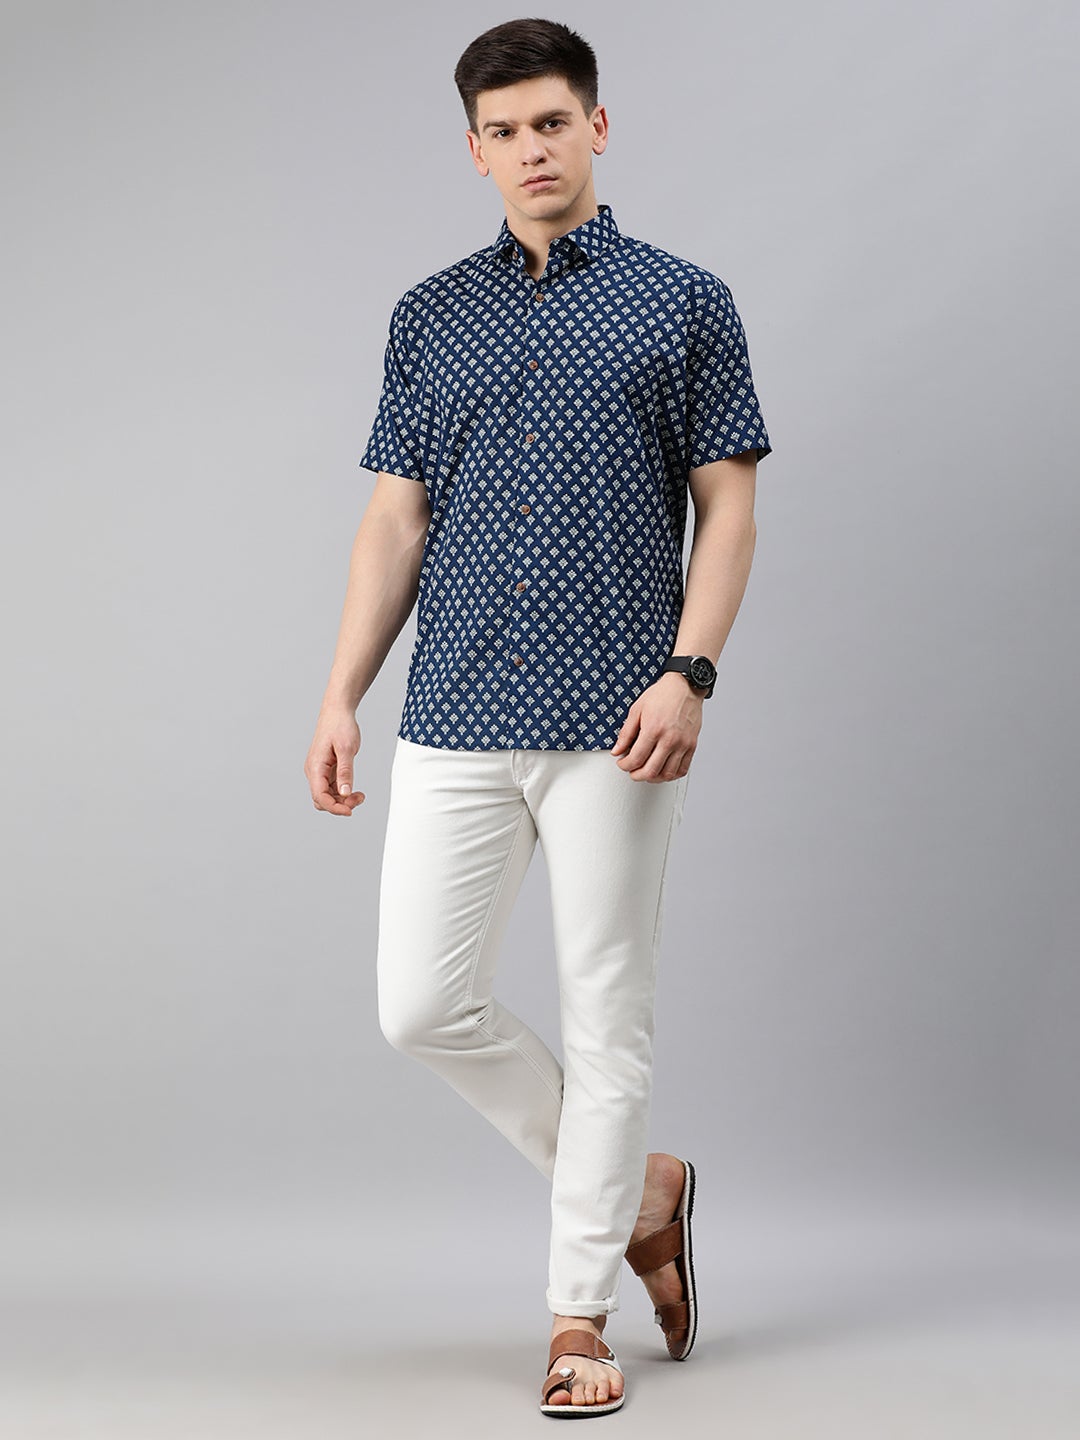 Blue Cotton Short Sleeves Shirts For Men